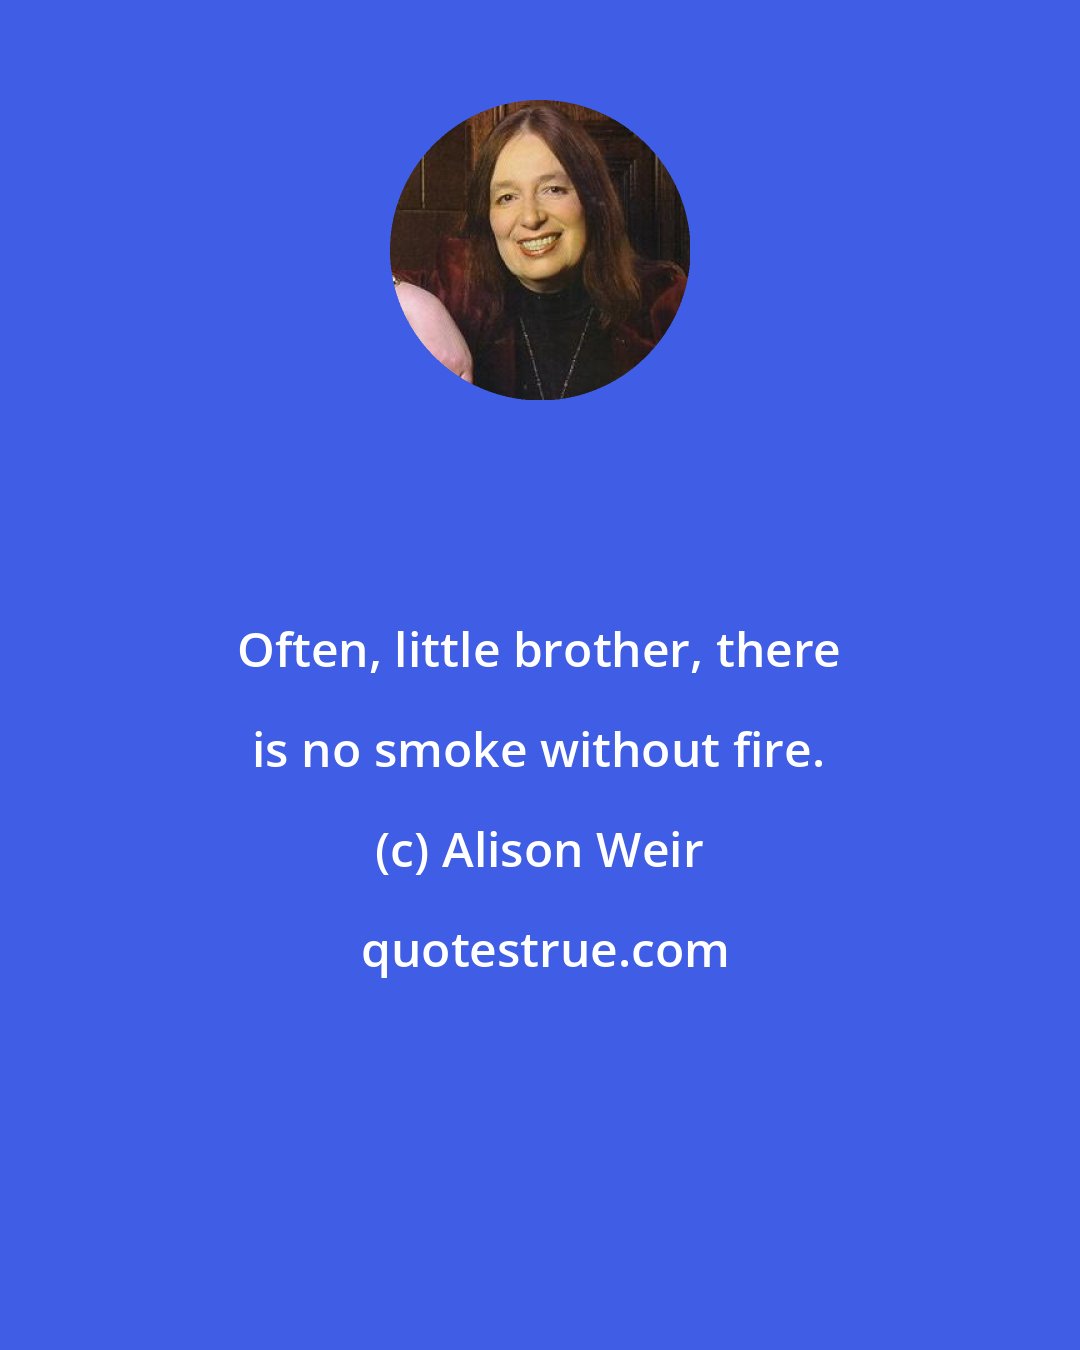 Alison Weir: Often, little brother, there is no smoke without fire.